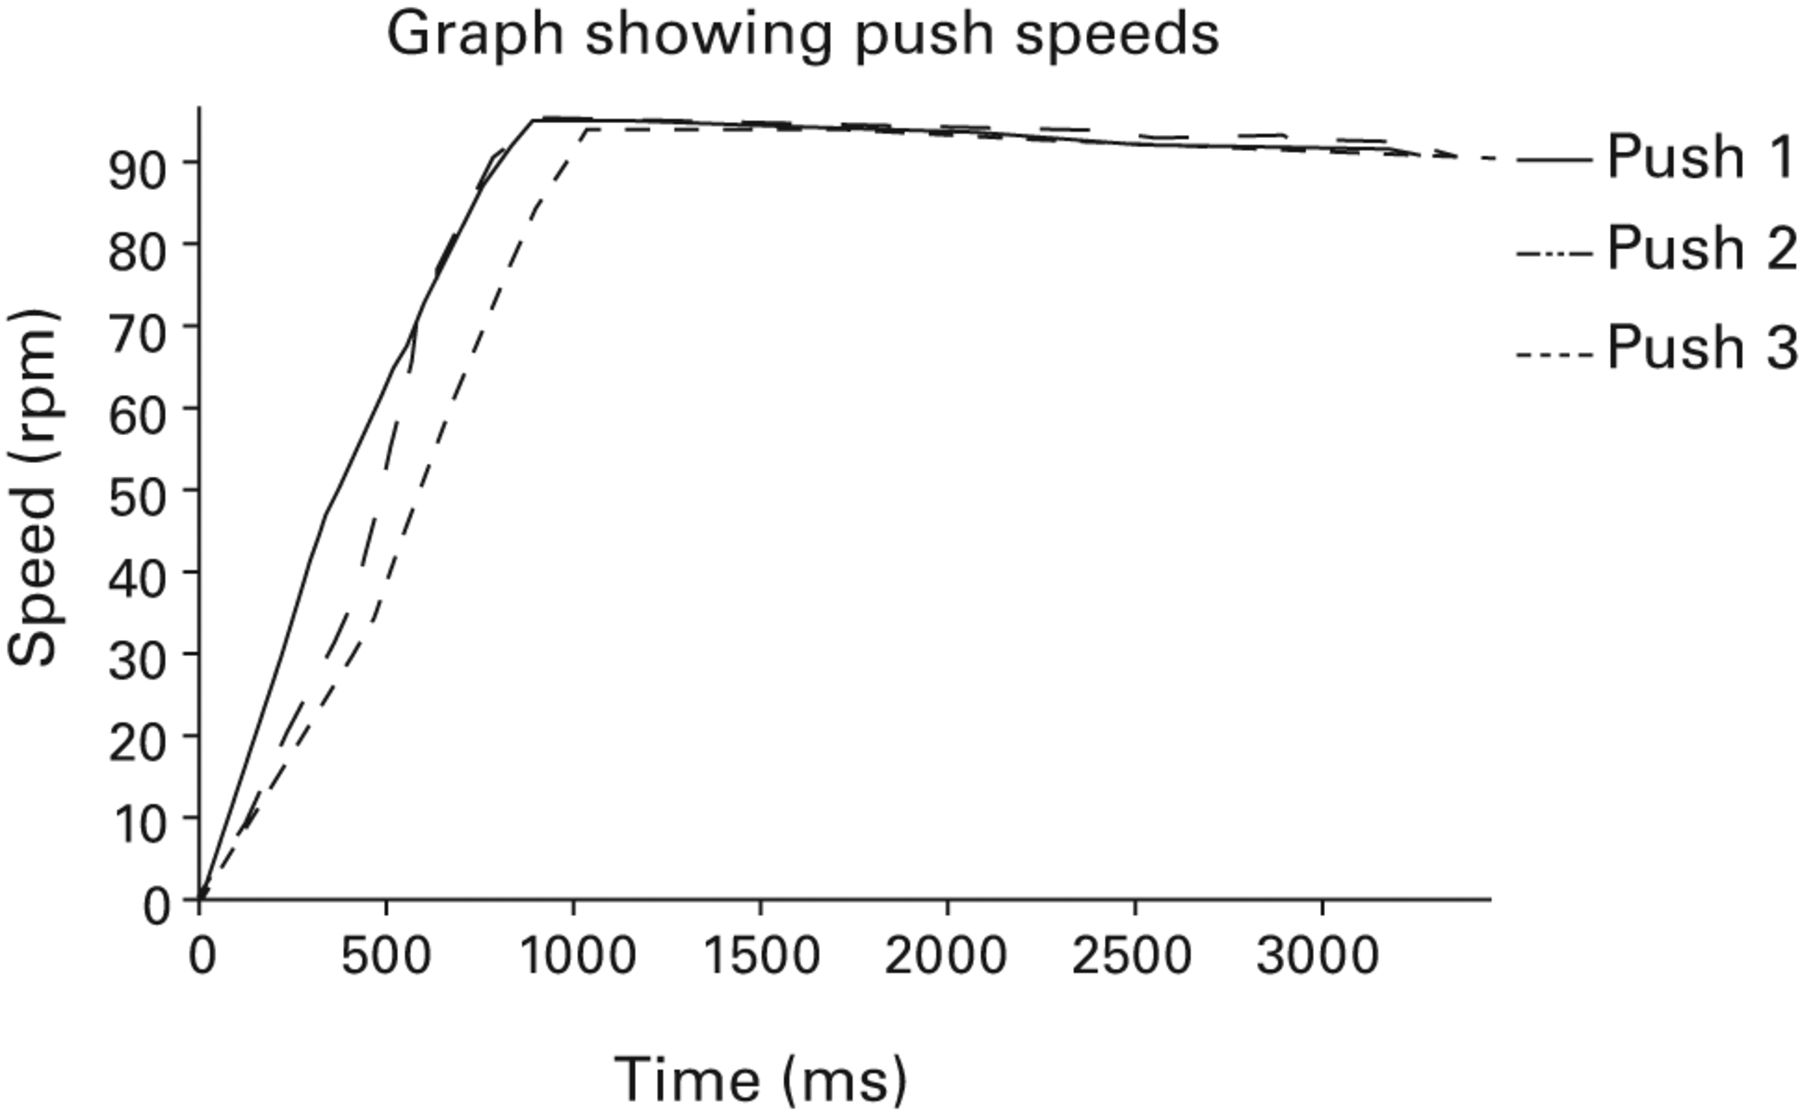 Figs. 1a - 1d 
            a) Example of a typical pre-operative
output pattern displaying multiple tests in a single patient from
the control group, showing a linear increase in speed of the flywheel
as the pedal is fully depressed. This trace highlights the comparatively slow
depression of the pedal and final flywheel speed achieved prior
to surgery in patients with osteoarthritis of the knee. This test
achieved an output of 20 W. b) Example of ‘normal’ post-operative
output pattern at six months, displaying multiple tests in the same
single patient from the control group, showing a linear increase
in speed of the flywheel as the pedal is fully depressed. This trace
highlights the comparatively quick depression of the pedal and final flywheel
speed compared with the pre-operative test. This test achieved an
output of 70 W. c) Example of the pre-operative ‘unstable’ output
graph, highlighting multiple tests in a single patient, showing
the distinctive ‘double-push’ pattern of linear acceleration, then
deceleration, then secondary acceleration as the patient attempts to
depress the pedal in a single forceful action. d) Example of the
post-operative resolution of ‘unstable’ pattern following revision knee
replacement, displaying multiple tests in the same single patient
from the unstable group. This test achieved an output of 49 W.
          